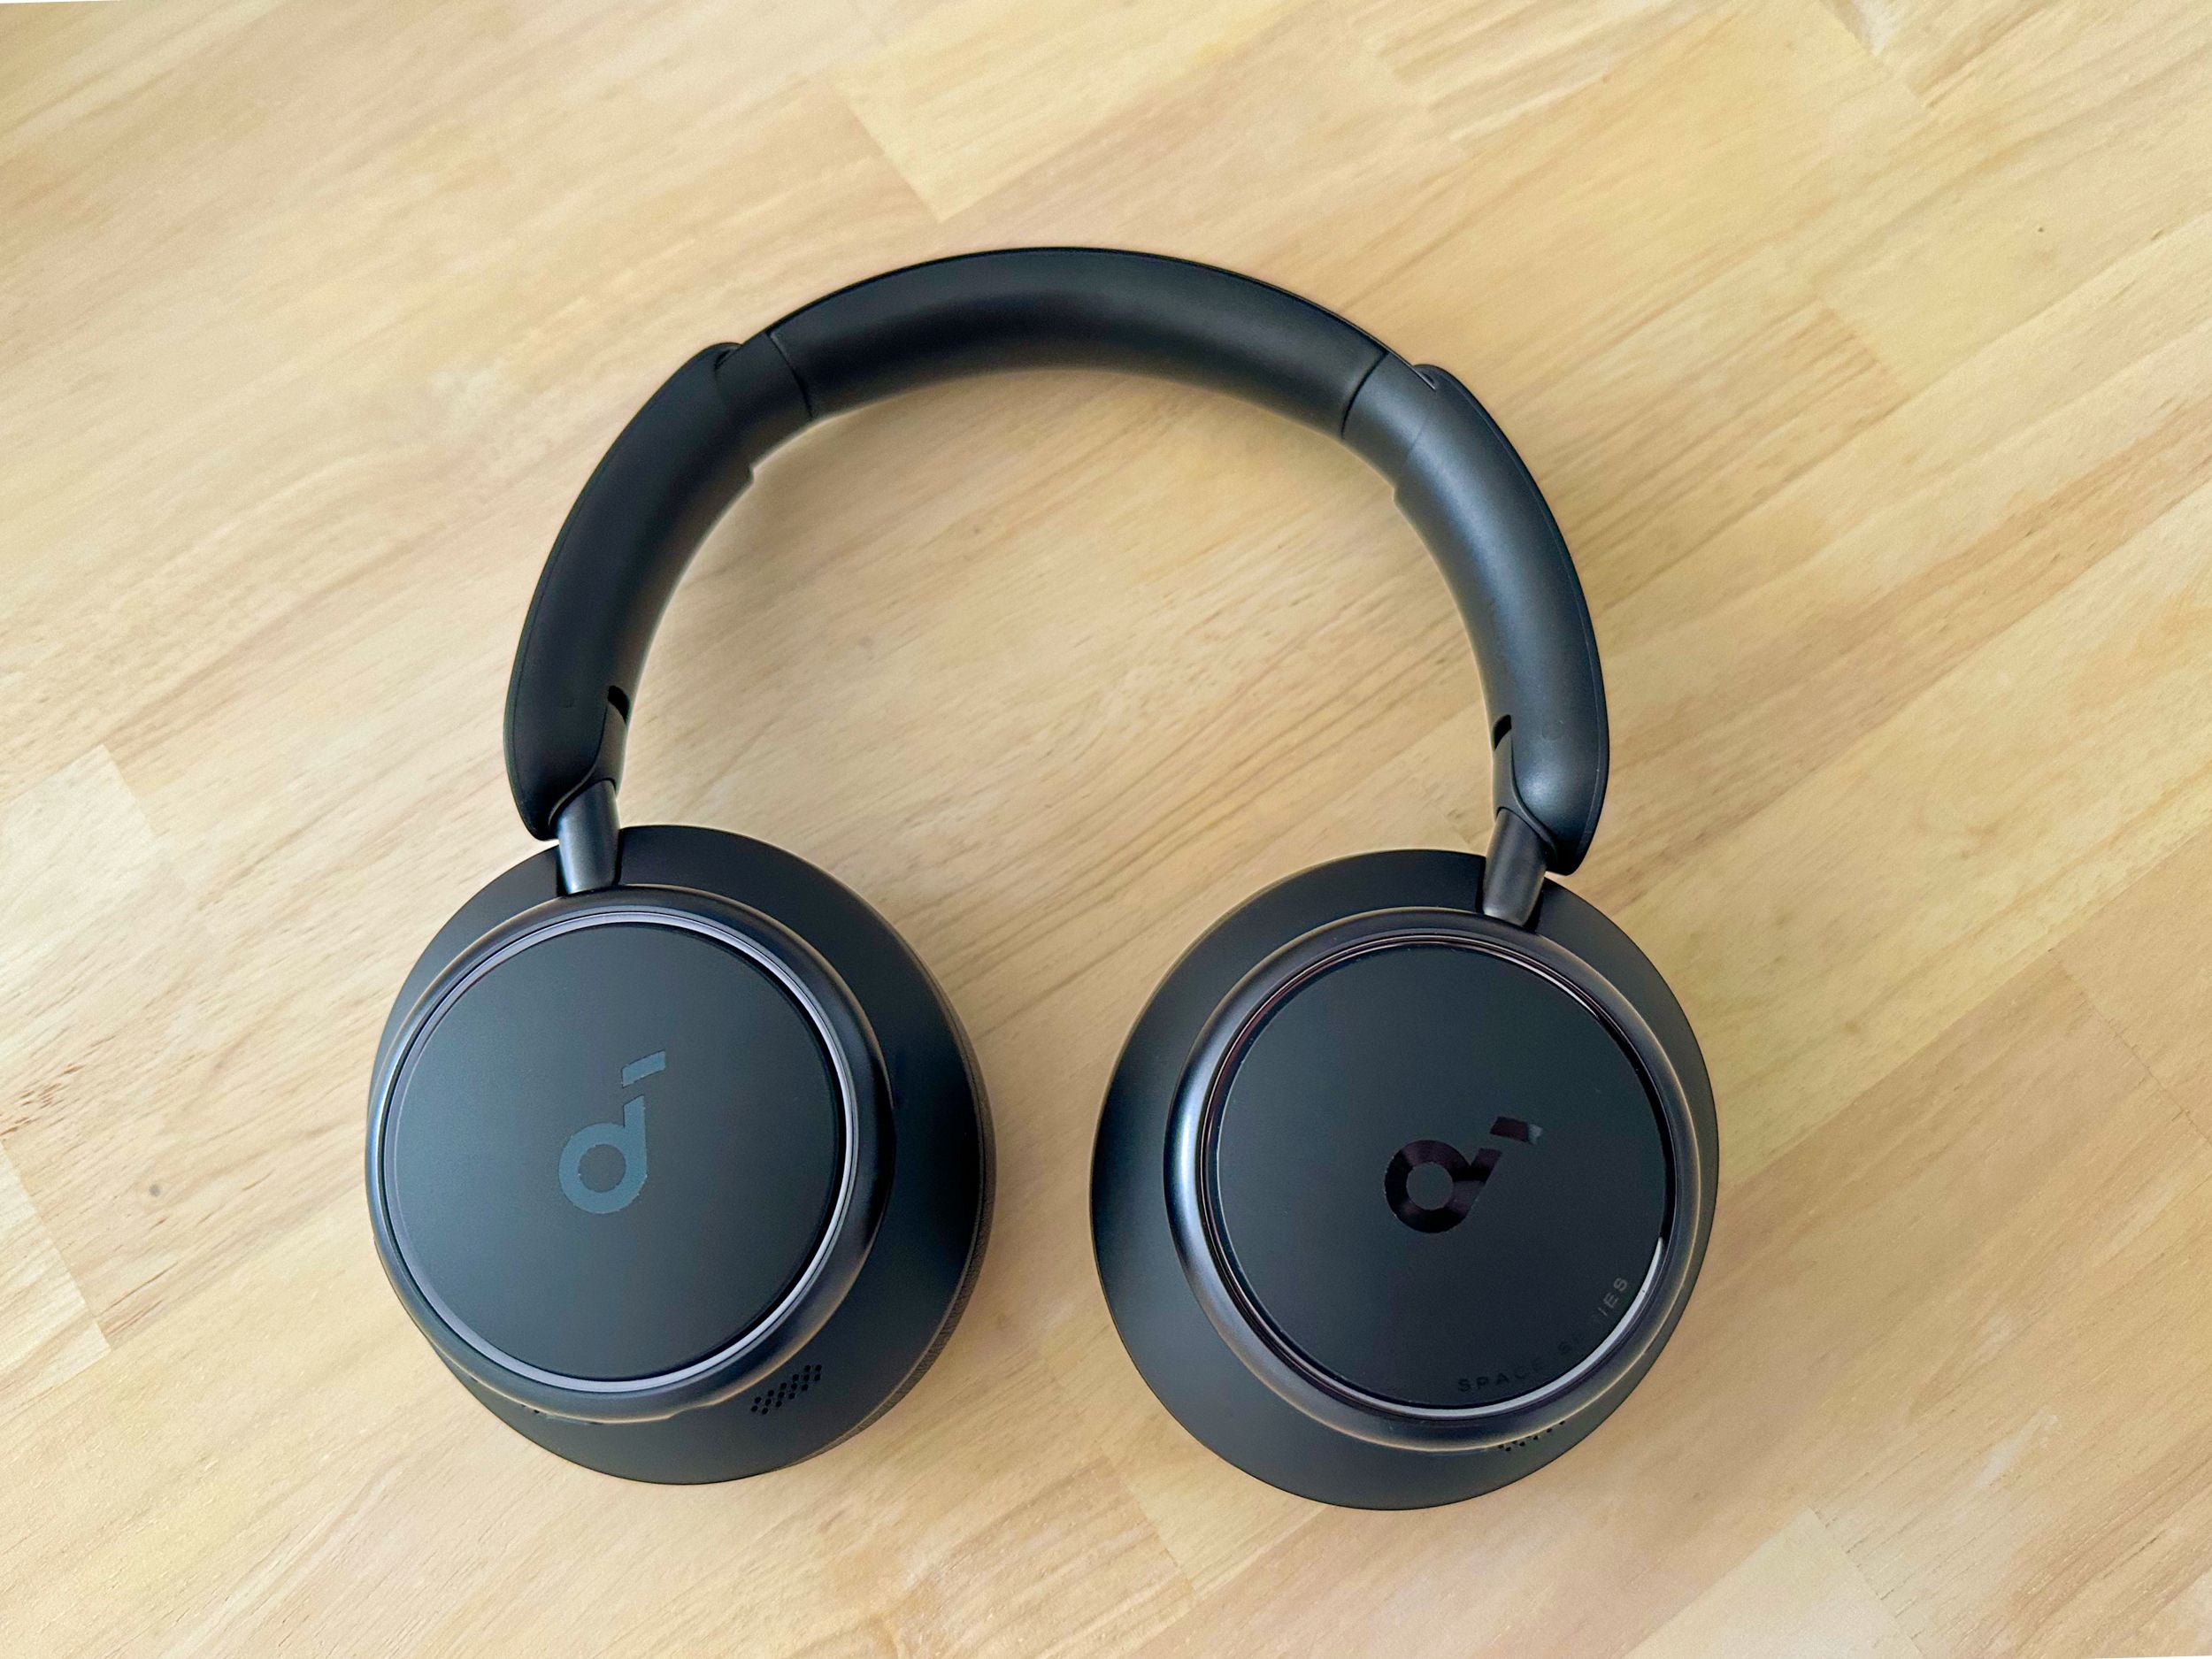 Soundcore Space Q45 review: As good as Sony or Bose for half the price